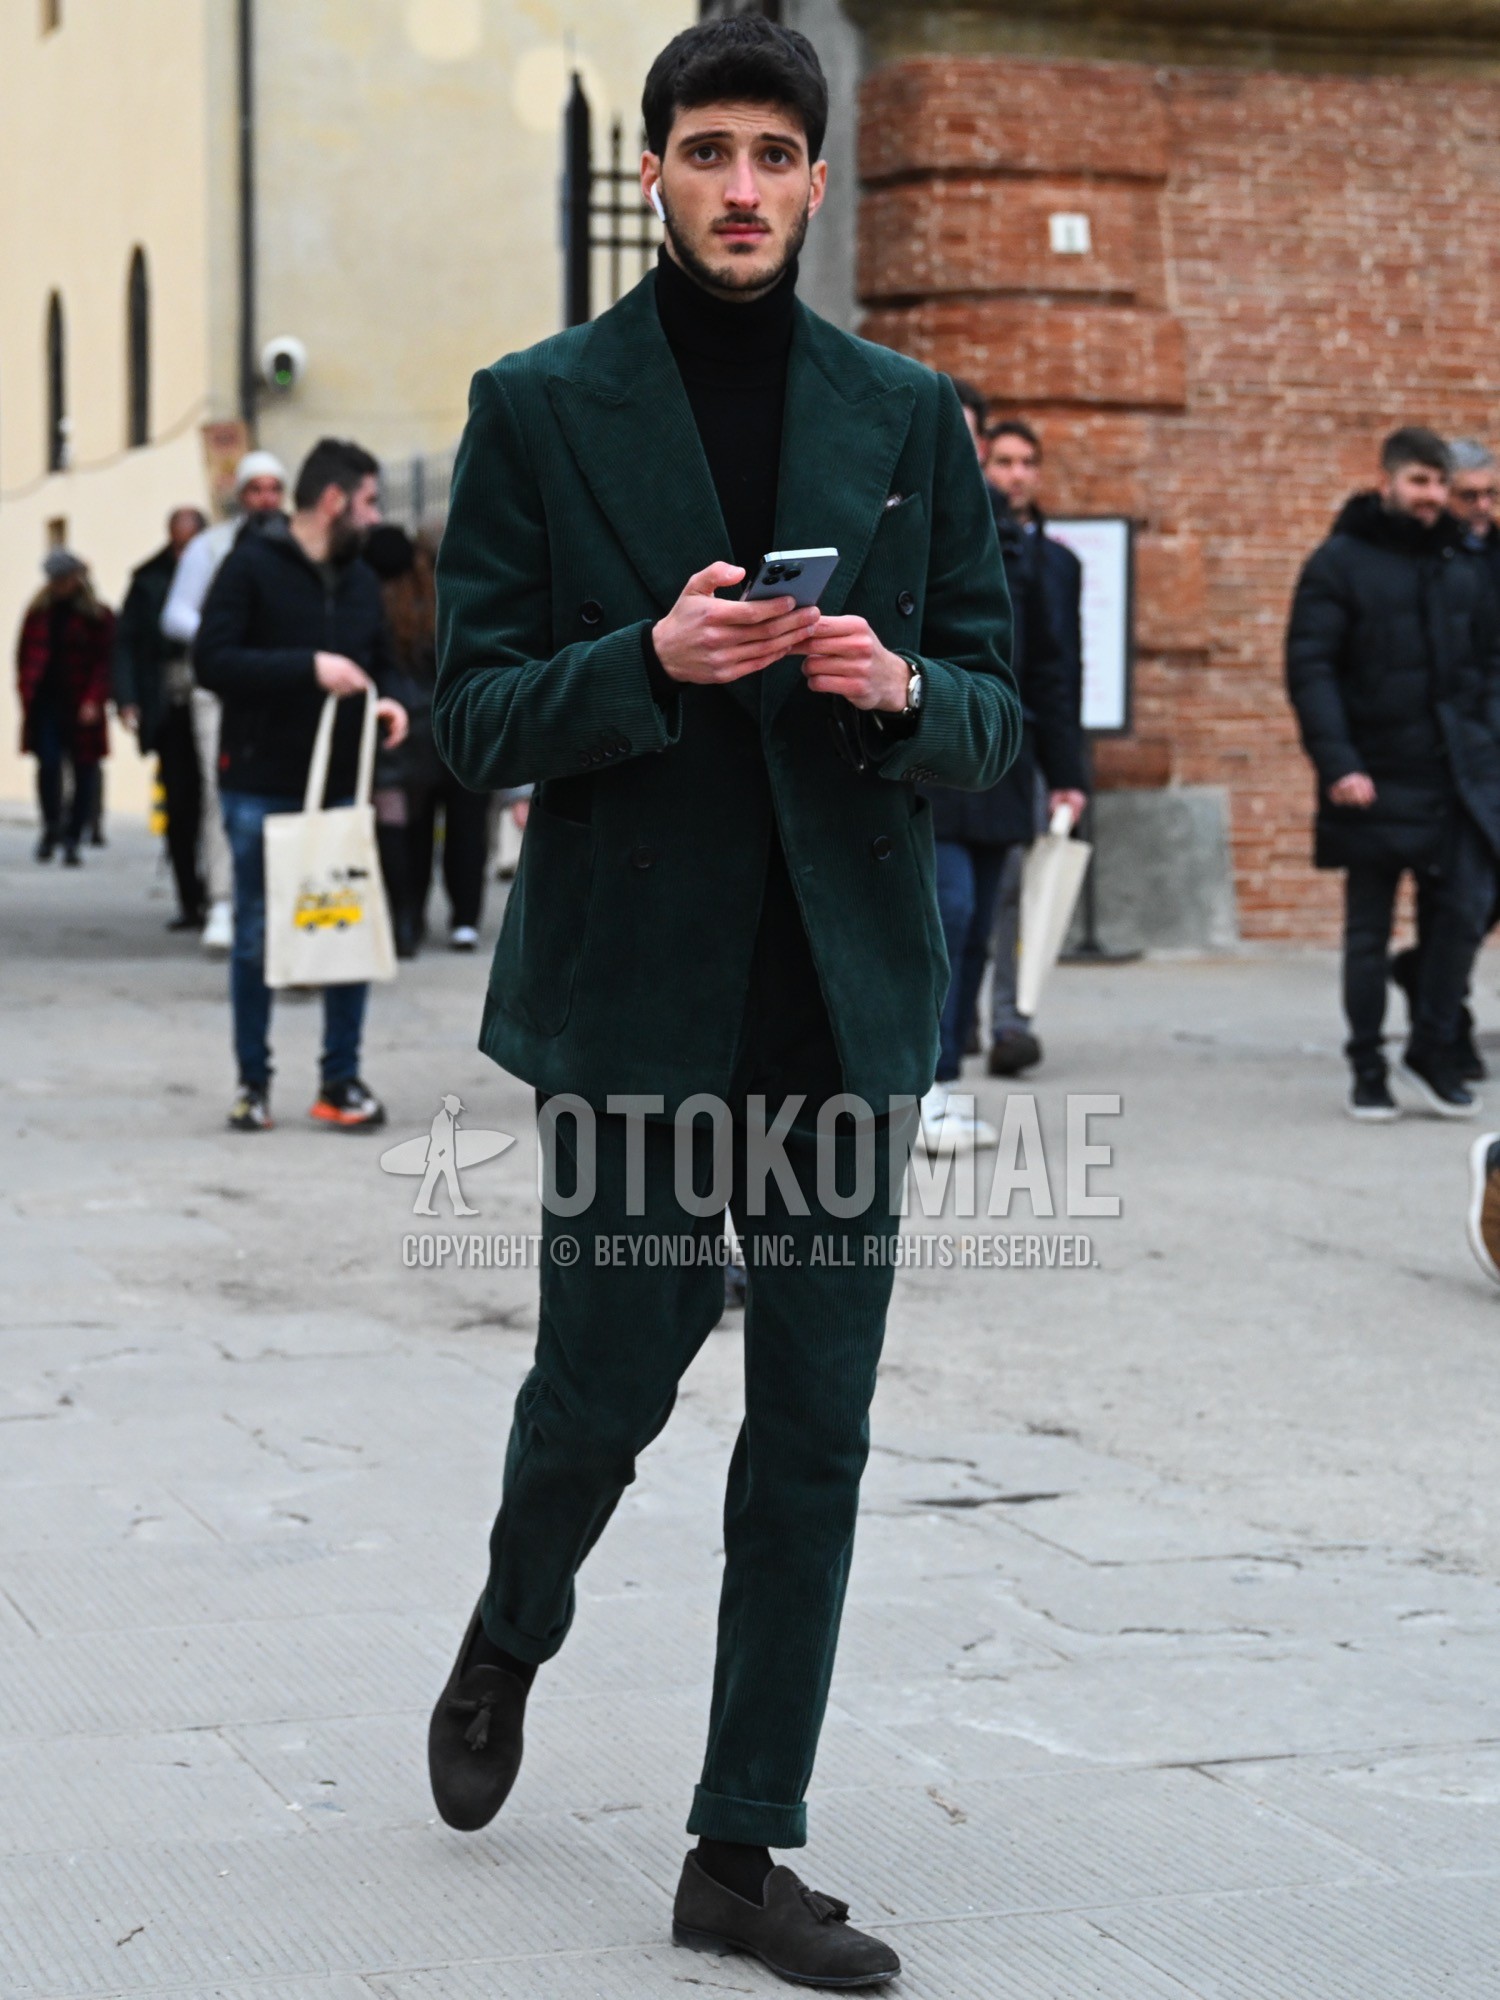 Men's spring autumn winter outfit with black plain turtleneck knit, black plain socks, dark gray tassel loafers leather shoes, dark gray suede shoes leather shoes, green plain suit.